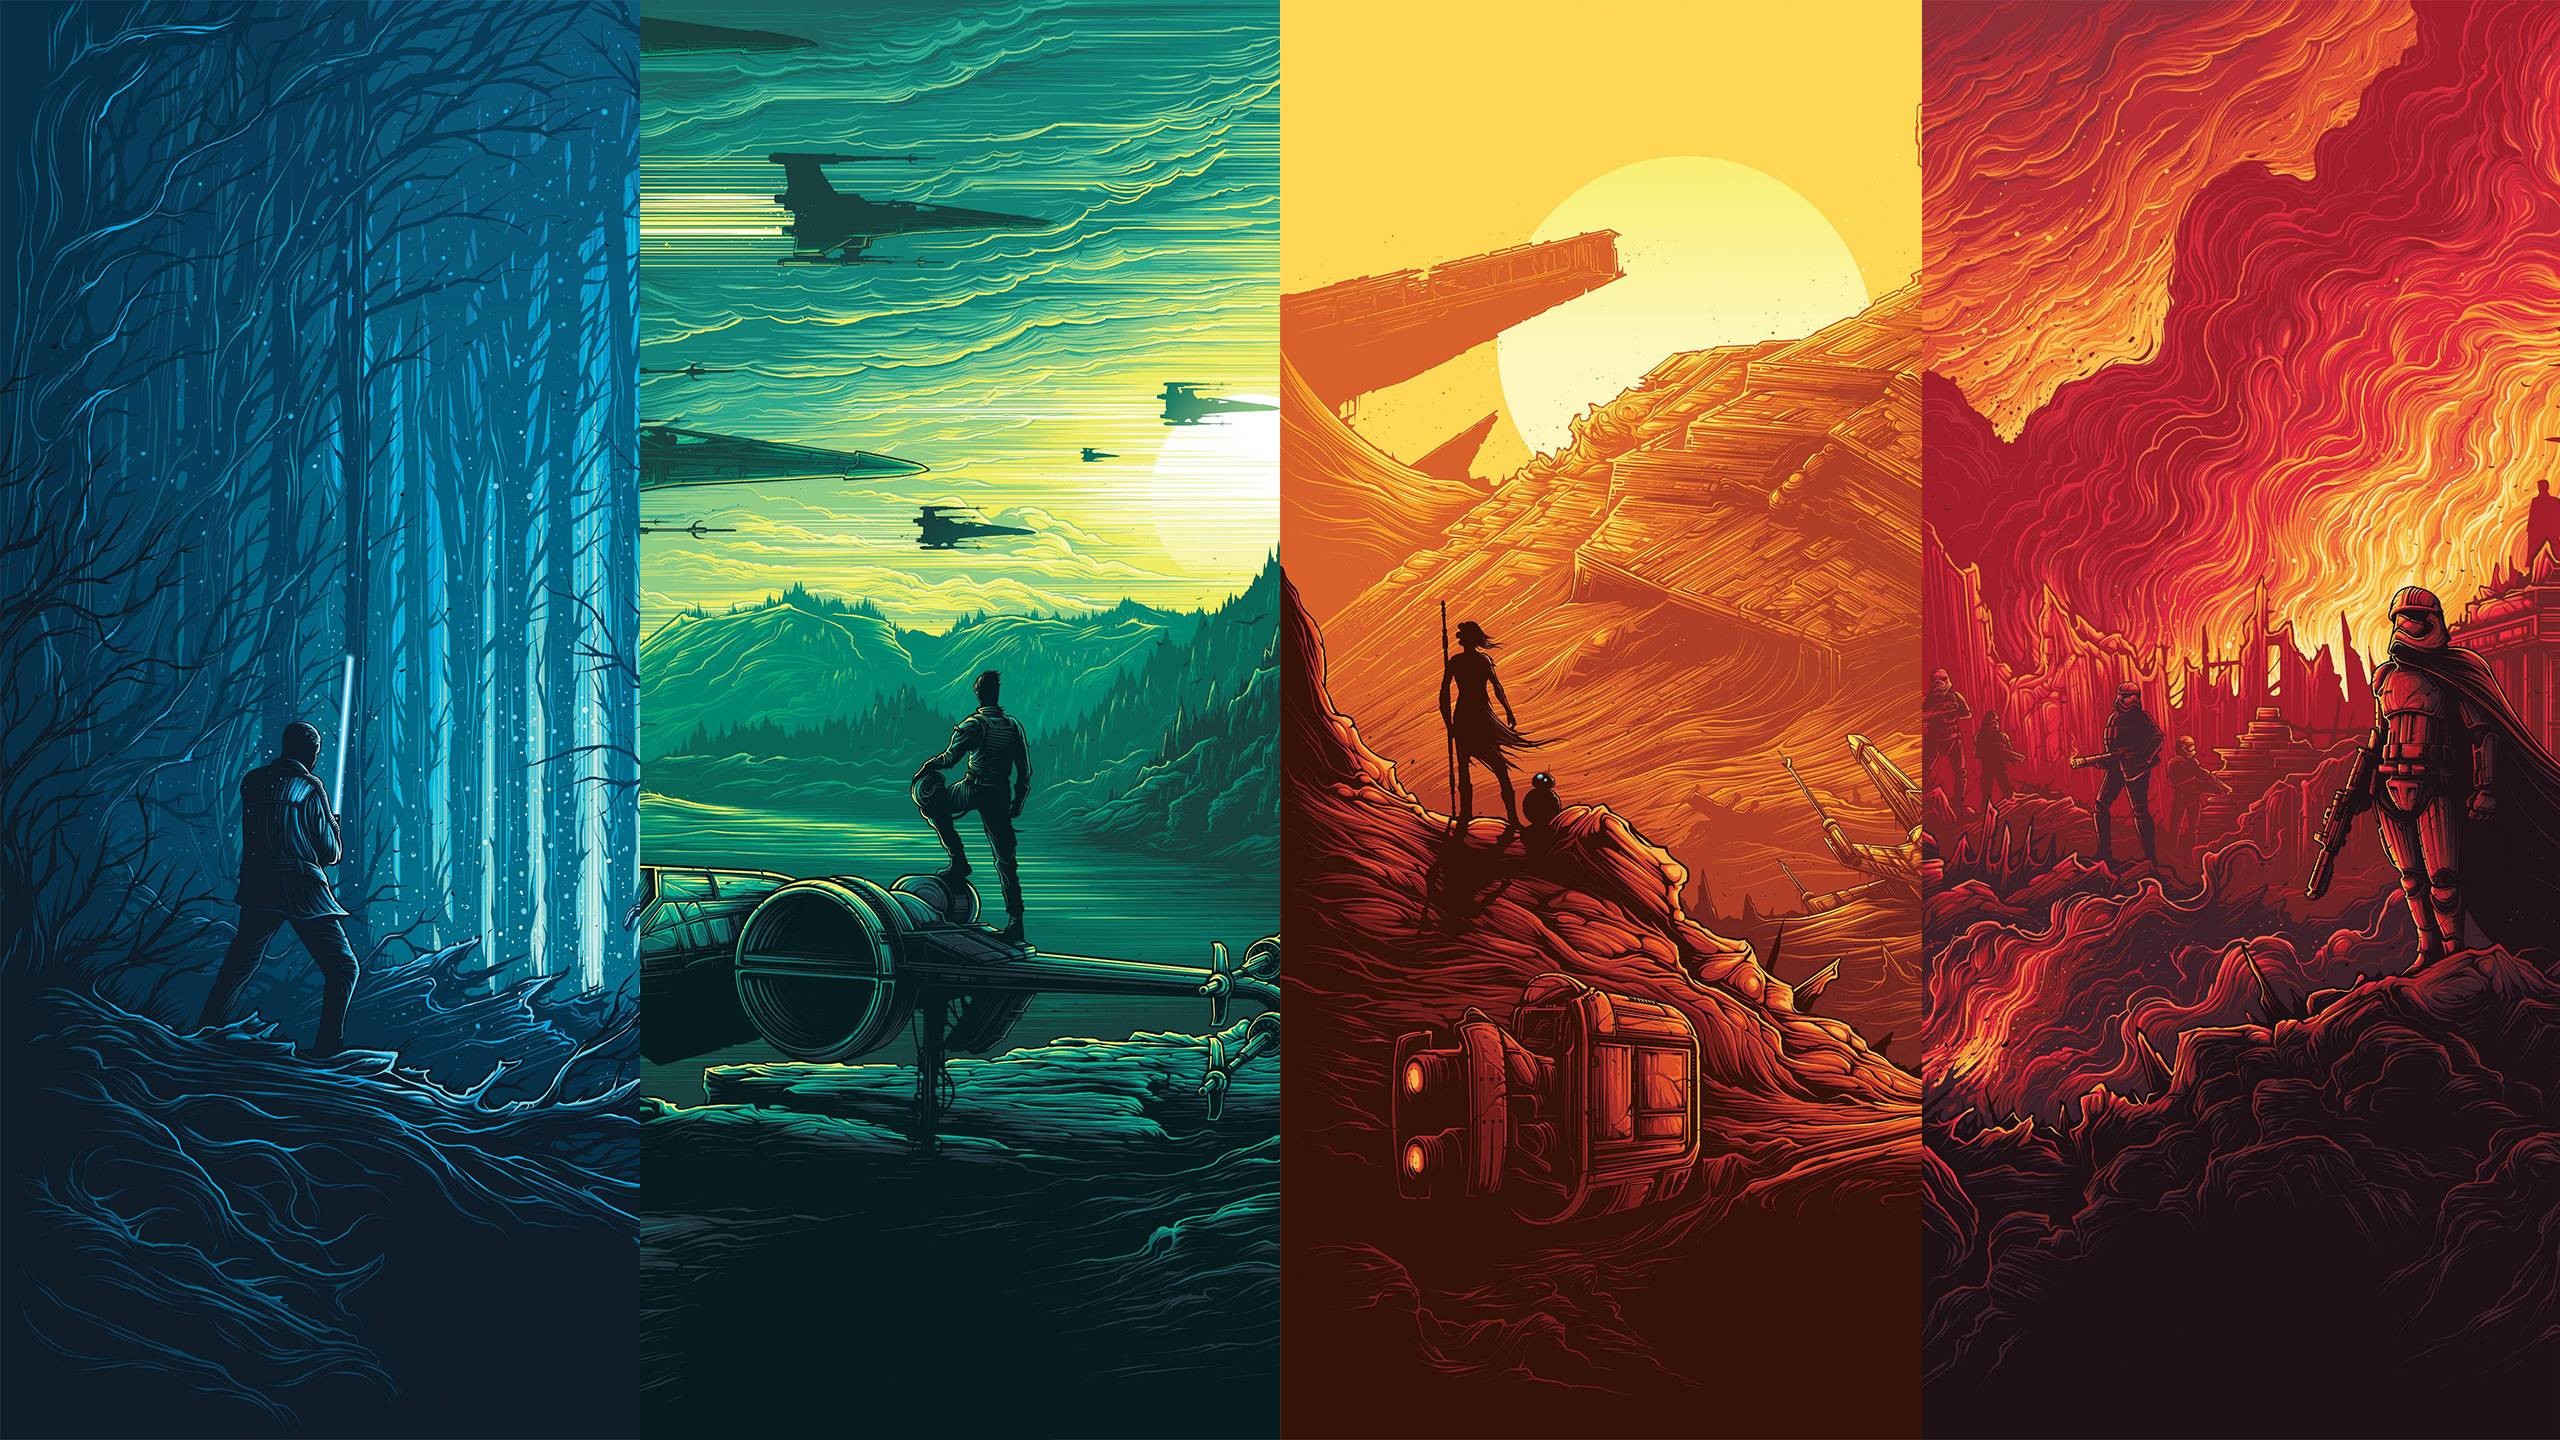 Tiny Star Wars Wallpaper collection